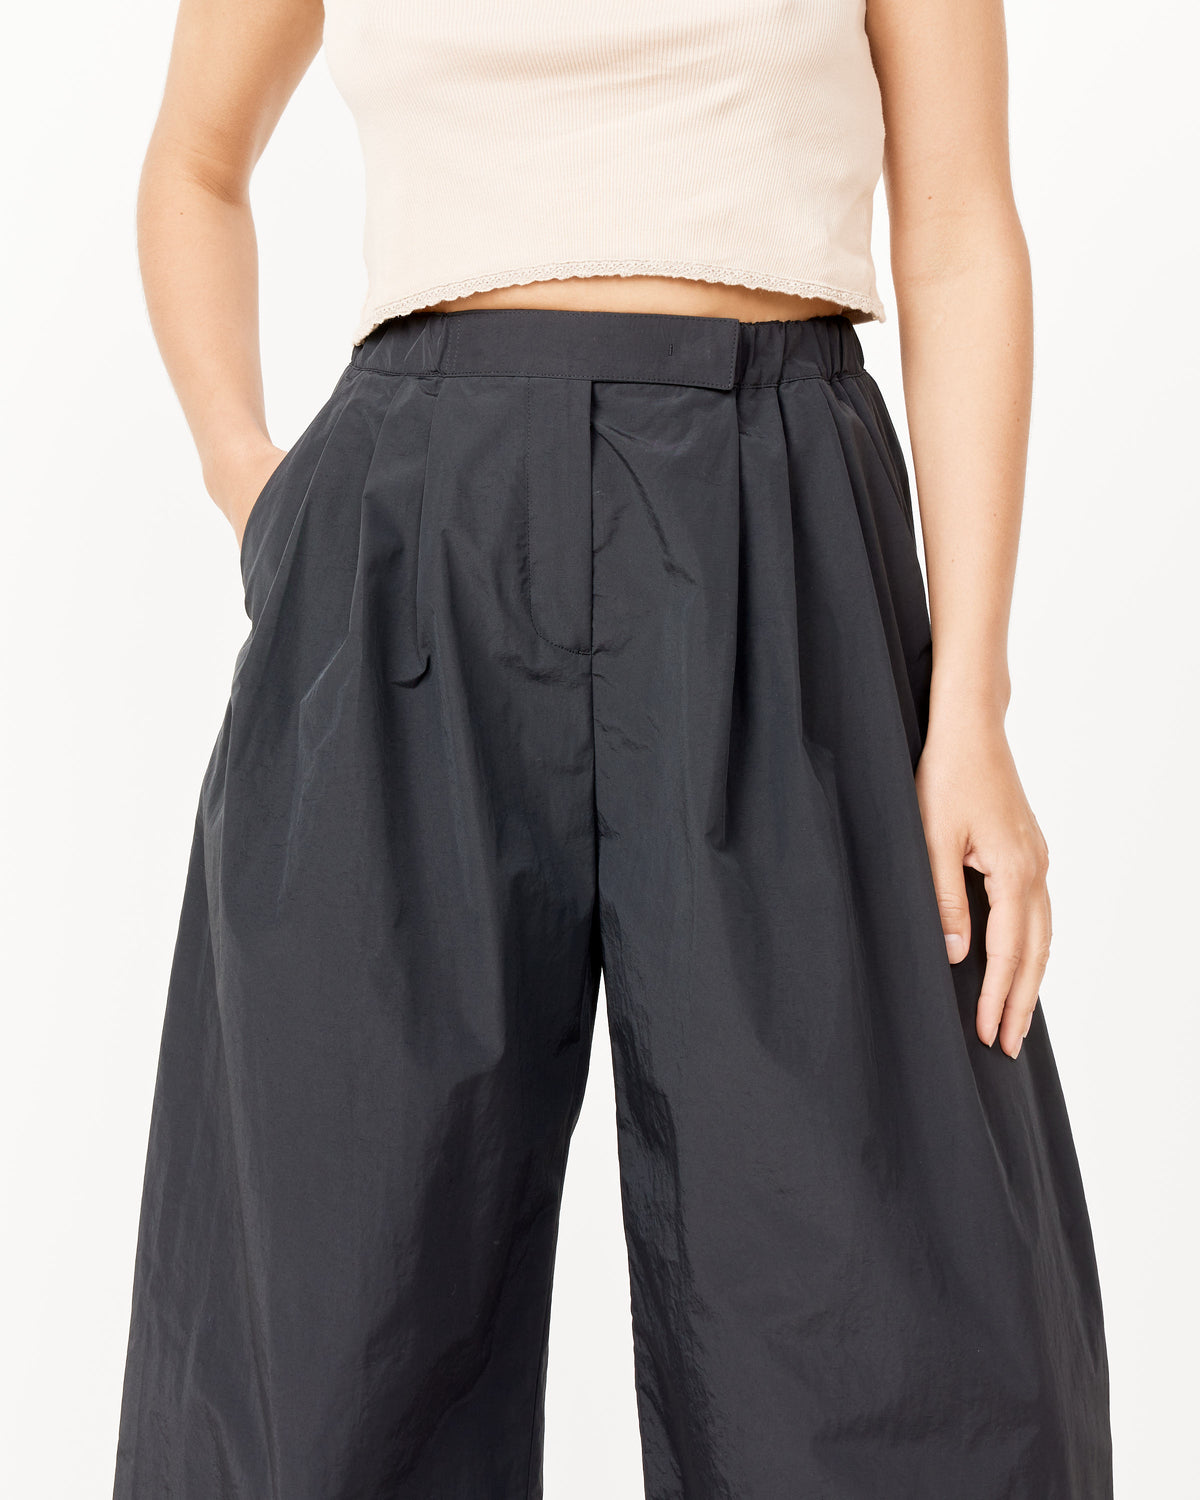 Shop Three Tuck Banding Pants Amomento online with the lowest